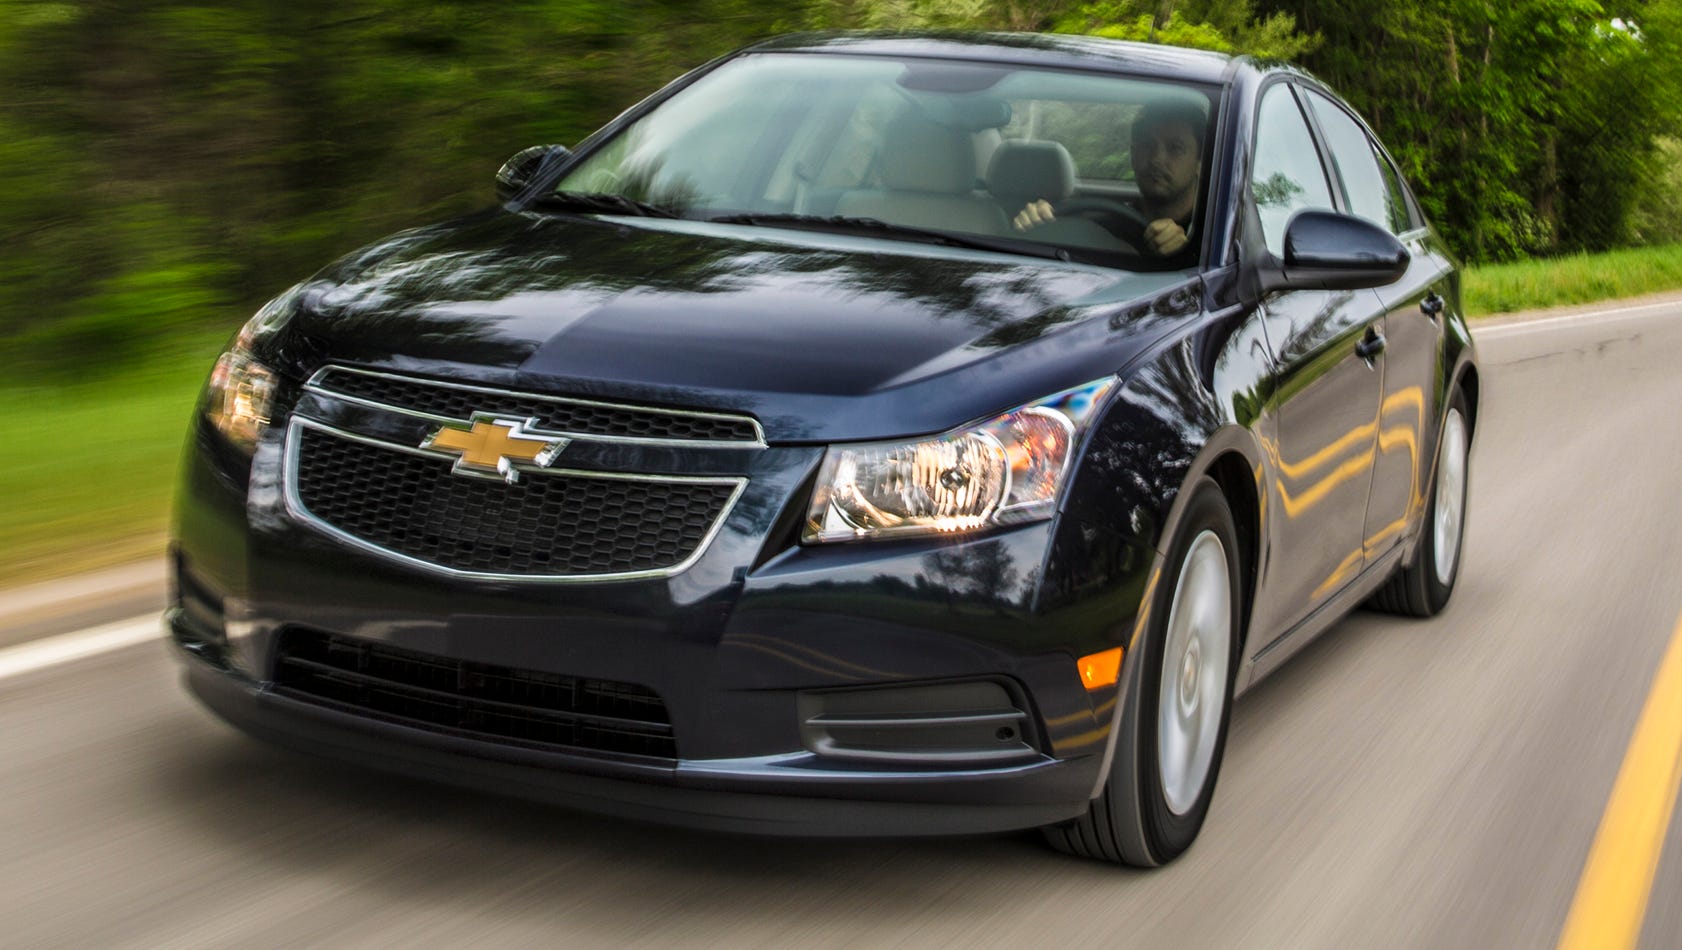 GM went global for Chevy Cruze Diesel's engine